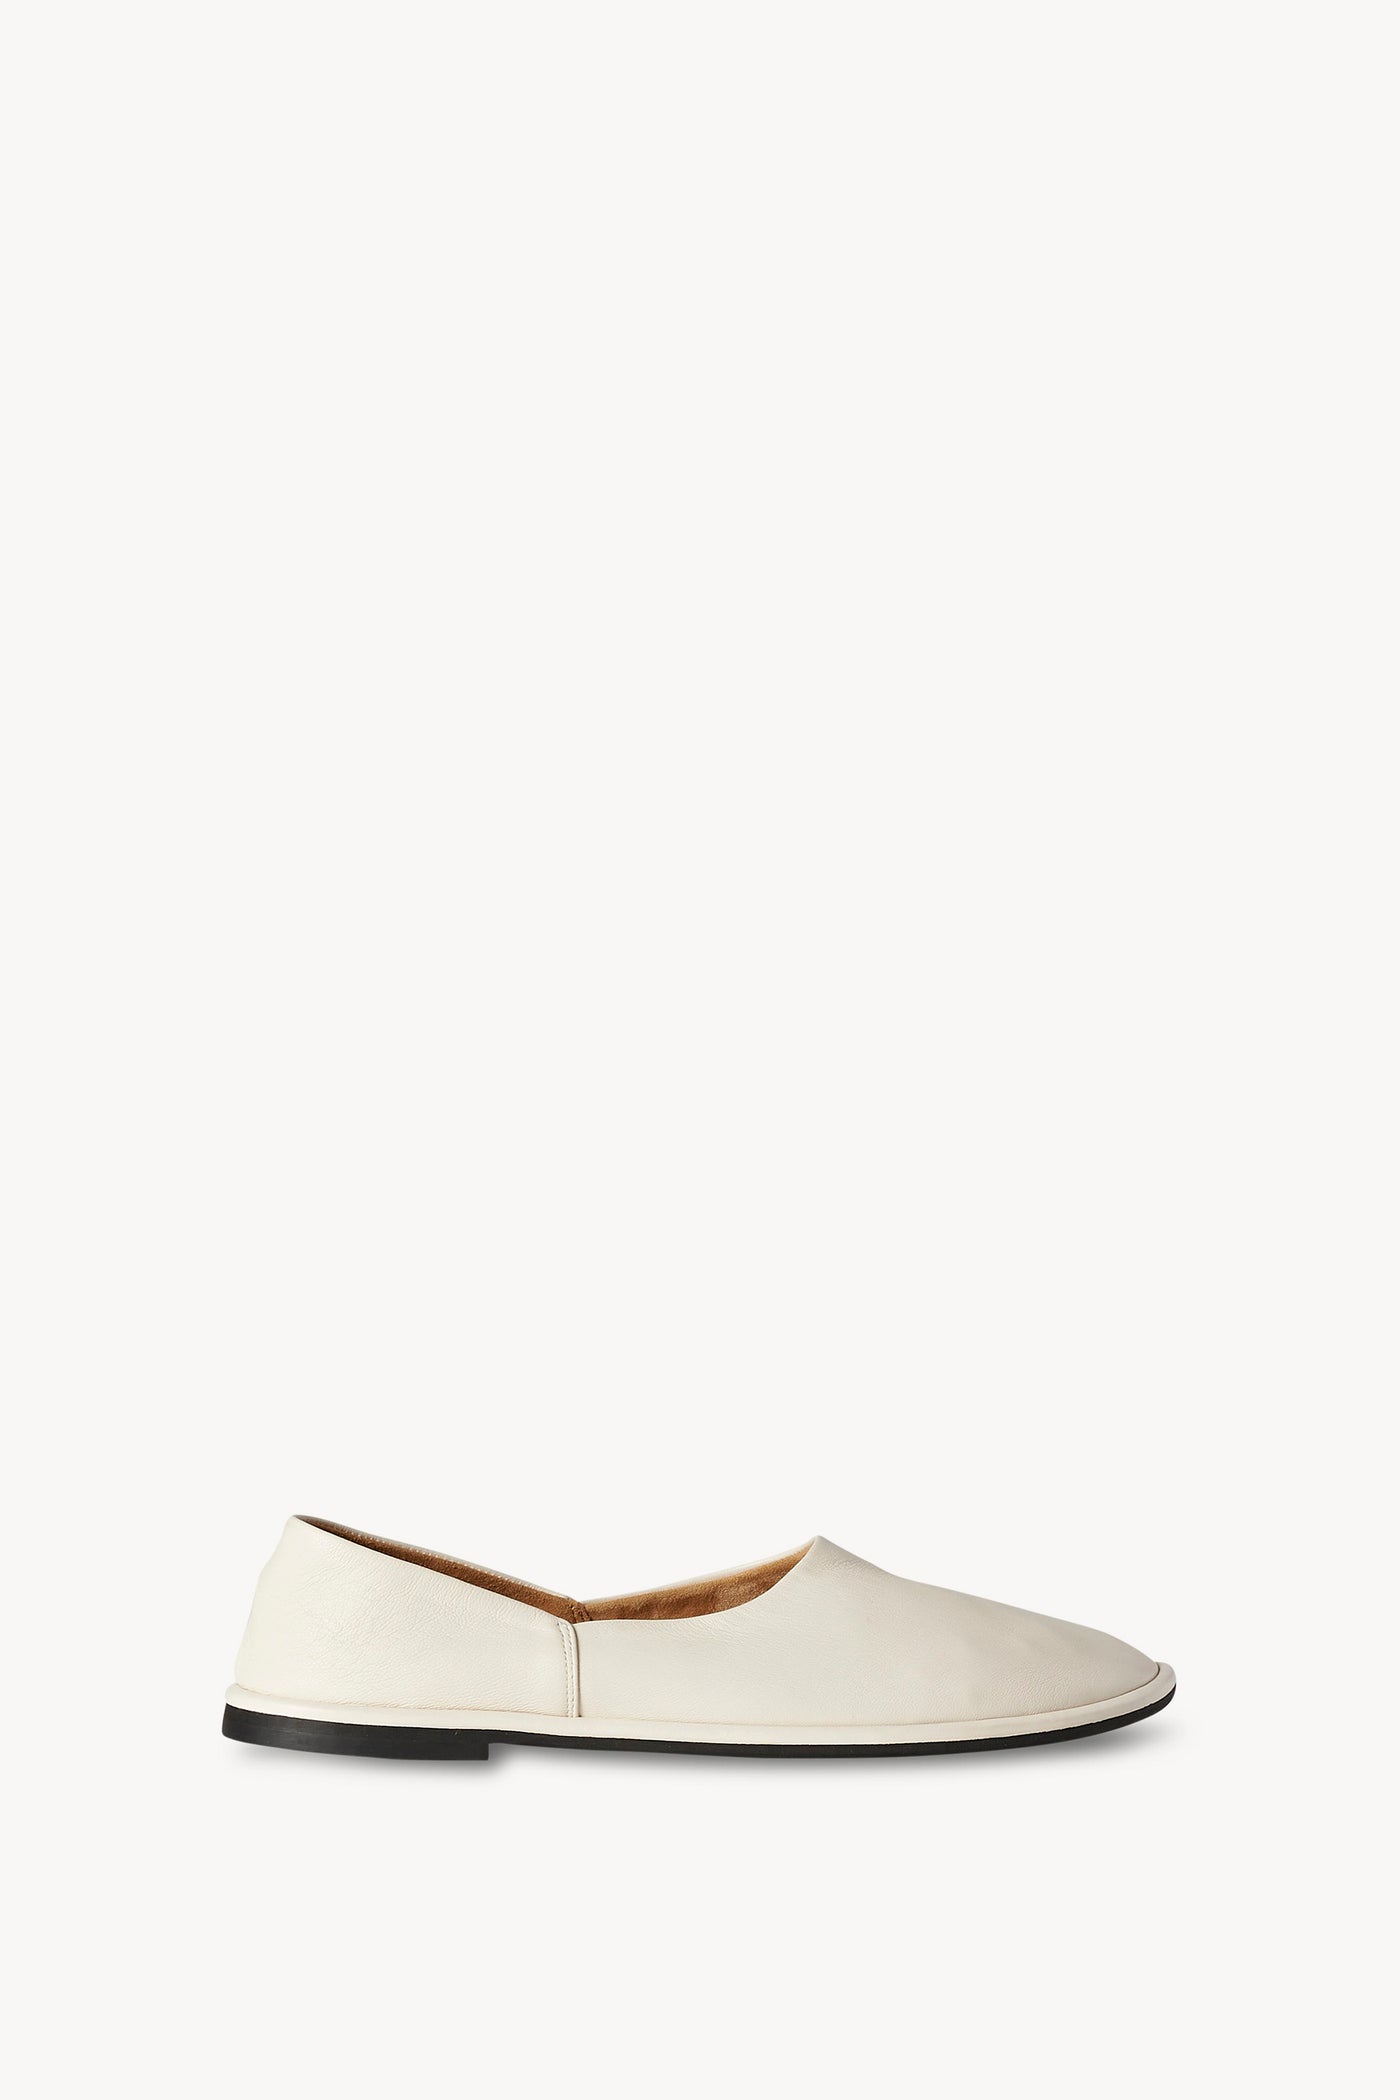 the-row-canal-leather-slip-on-milk-amarees